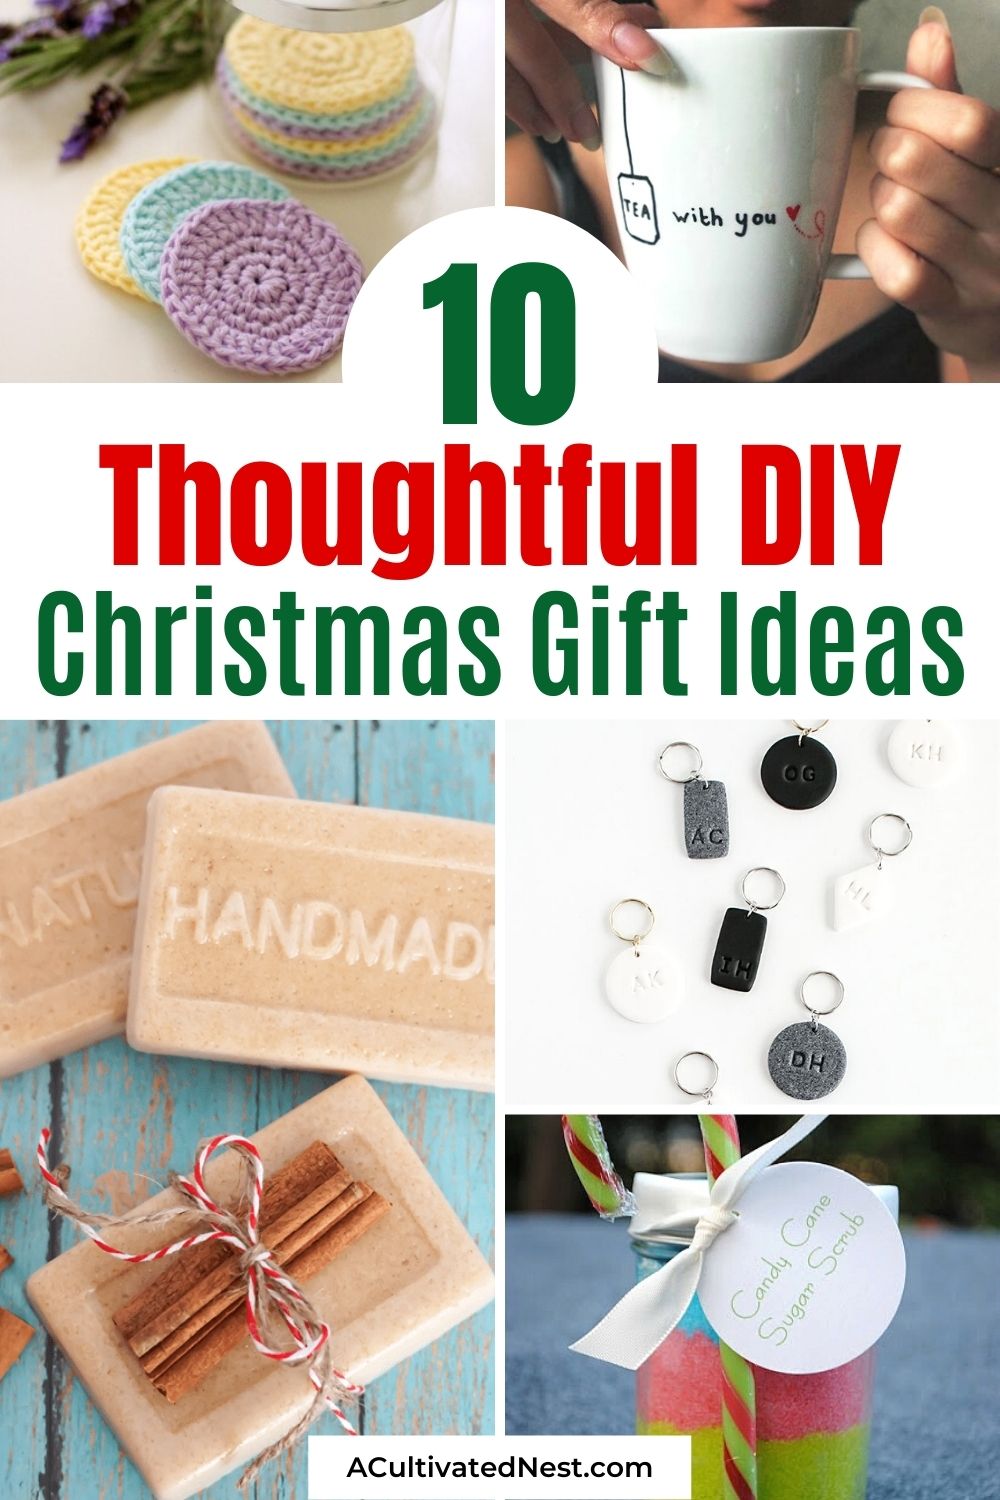 Homemade Christmas Gifts You Can Make- This holiday season, give some thoughtful and budget-friendly gifts by making your own homemade Christmas gifts! | #diyGift #homemadeGift #handmadeGifts #ChristmasGiftIdeas #ACultivatedNest